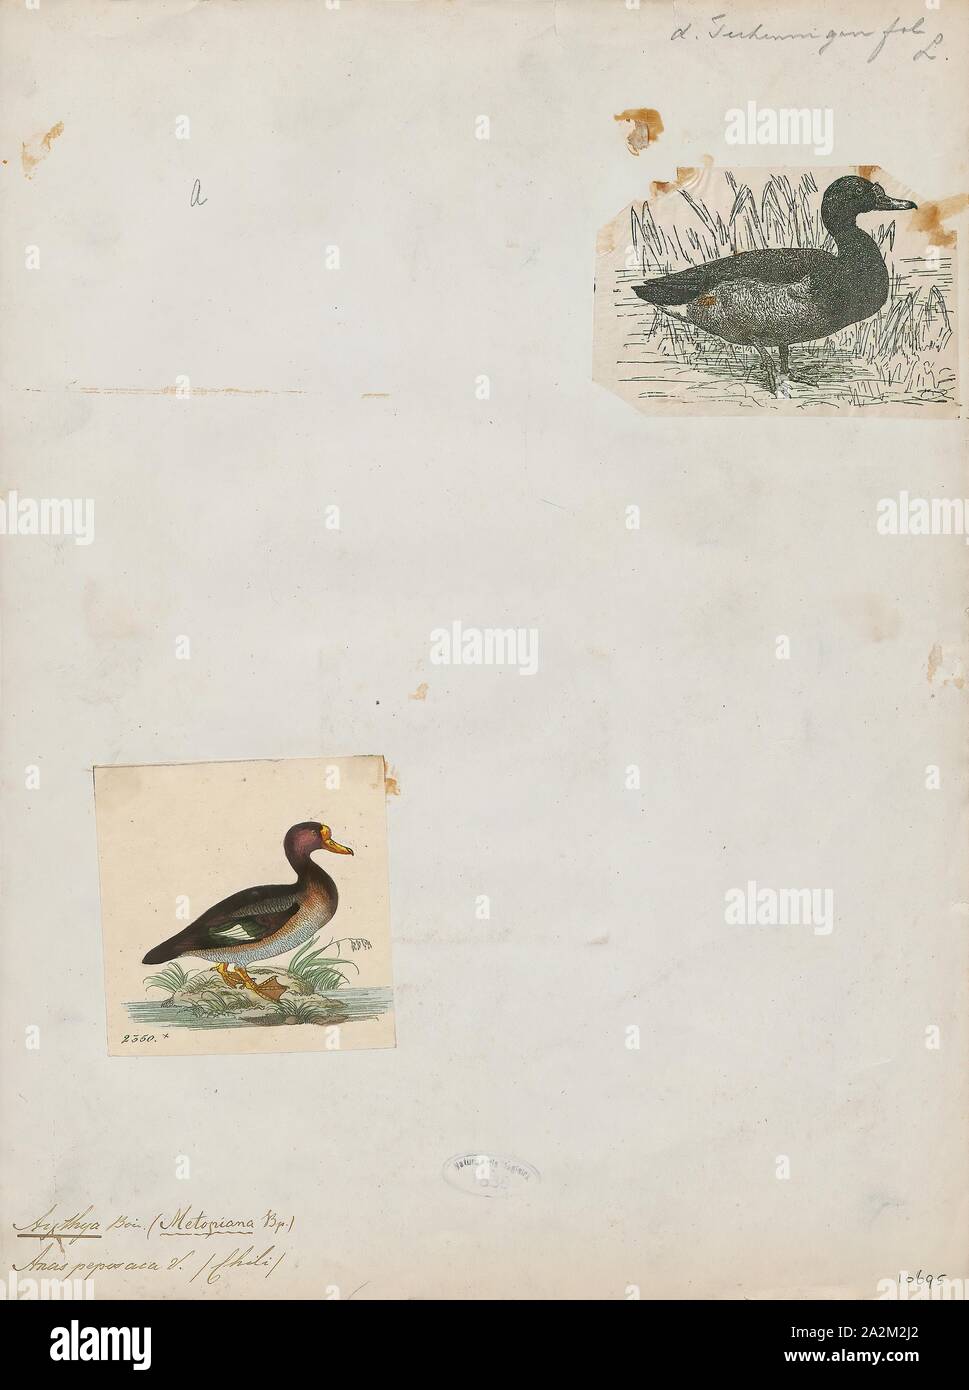 Aythya peposaca, Print, Aythya is a genus of diving ducks. It has twelve described species. The name Aythya comes from the Ancient Greek word αυθυια, aithuia, which may have referred to a sea-dwelling duck or an auklet., 1700-1880 Stock Photo